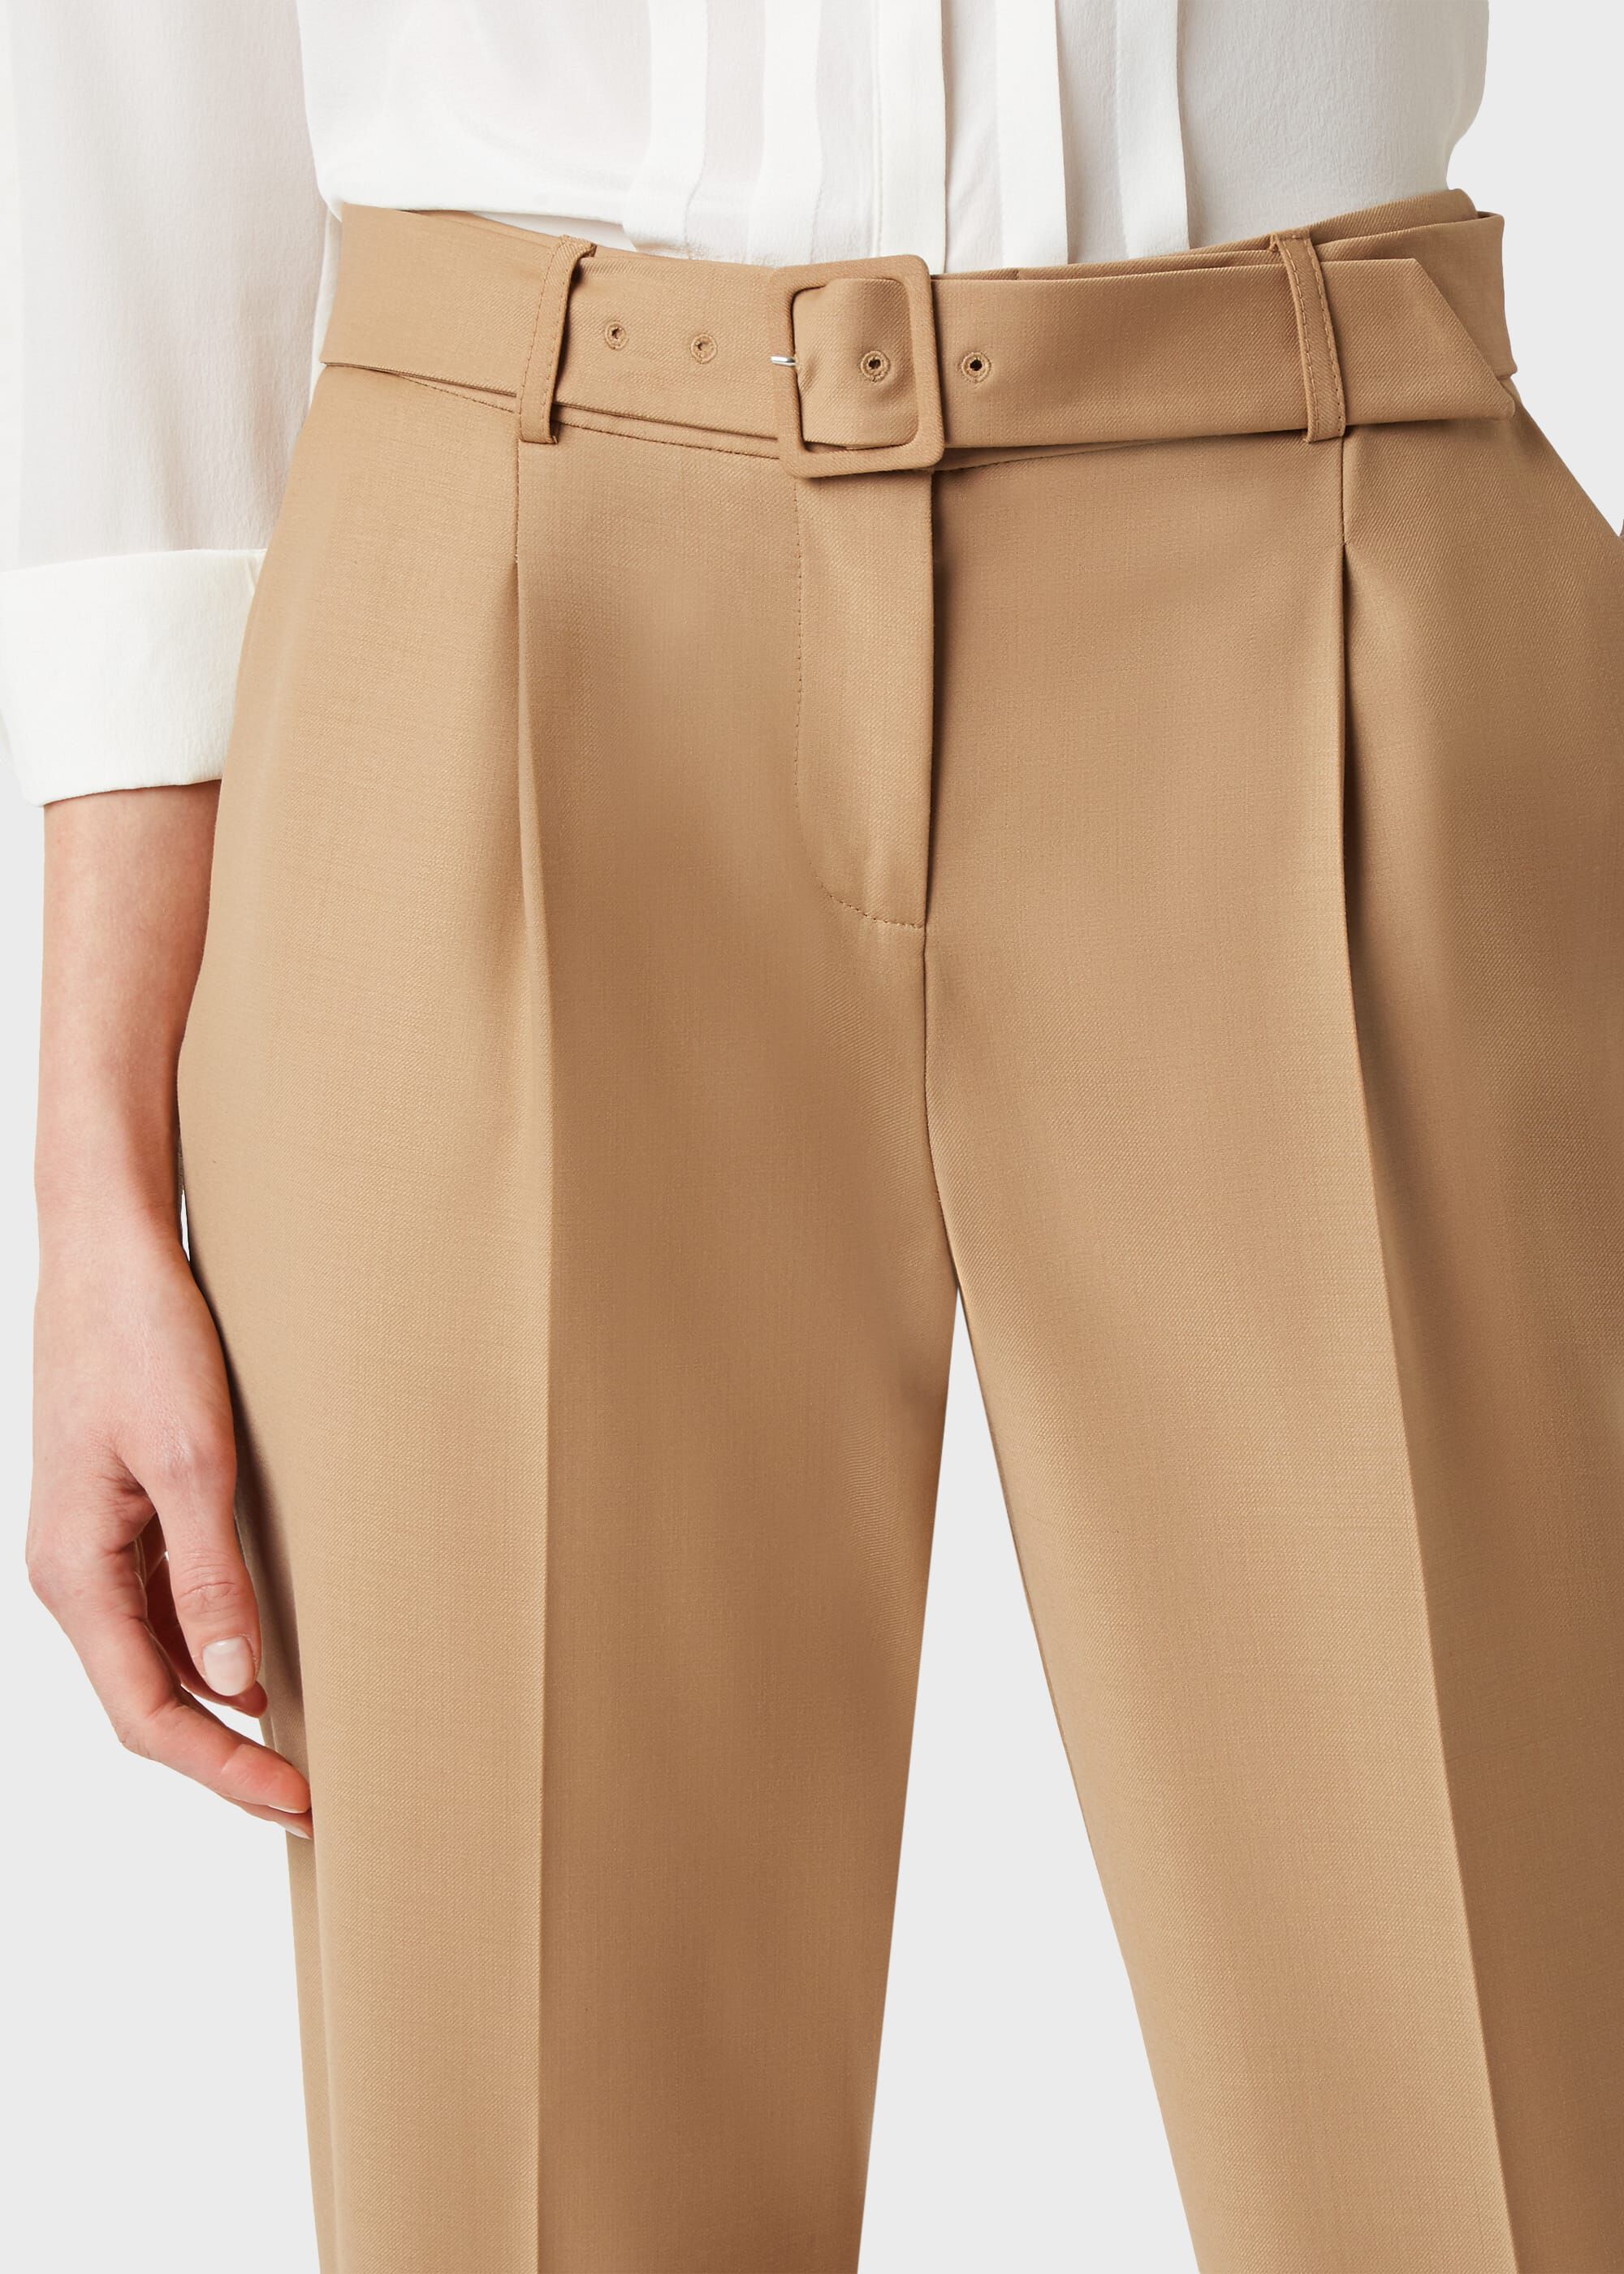 Paul Smith Tapered Trousers  Camel M2R959RA2001264  Aphrodite